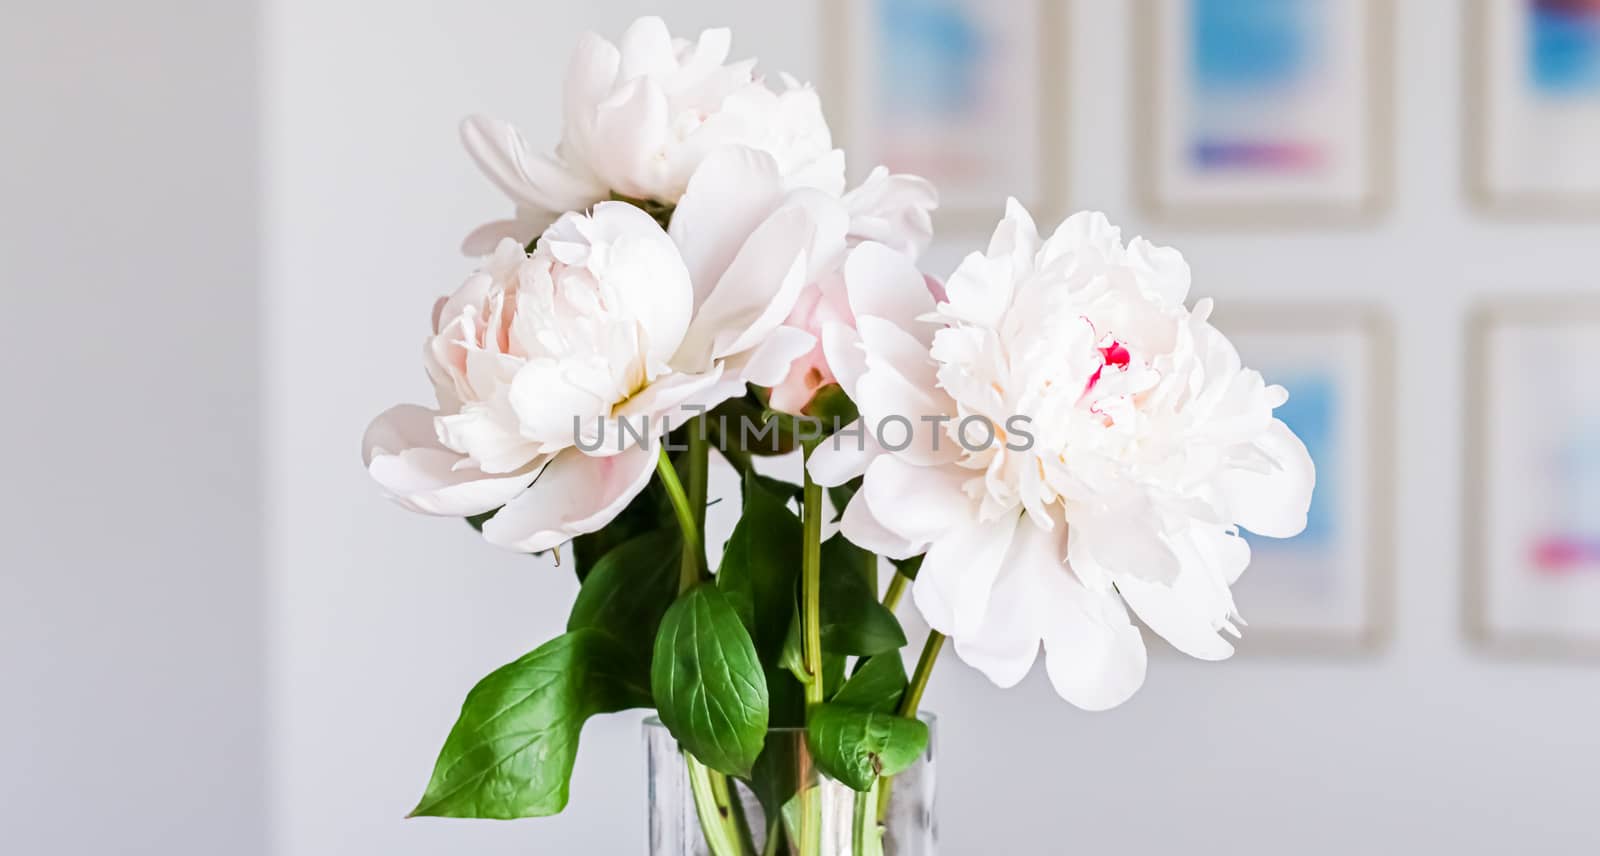 Chic bouquet of peony flowers in vase as home decor idea, luxury interior design and decoration by Anneleven